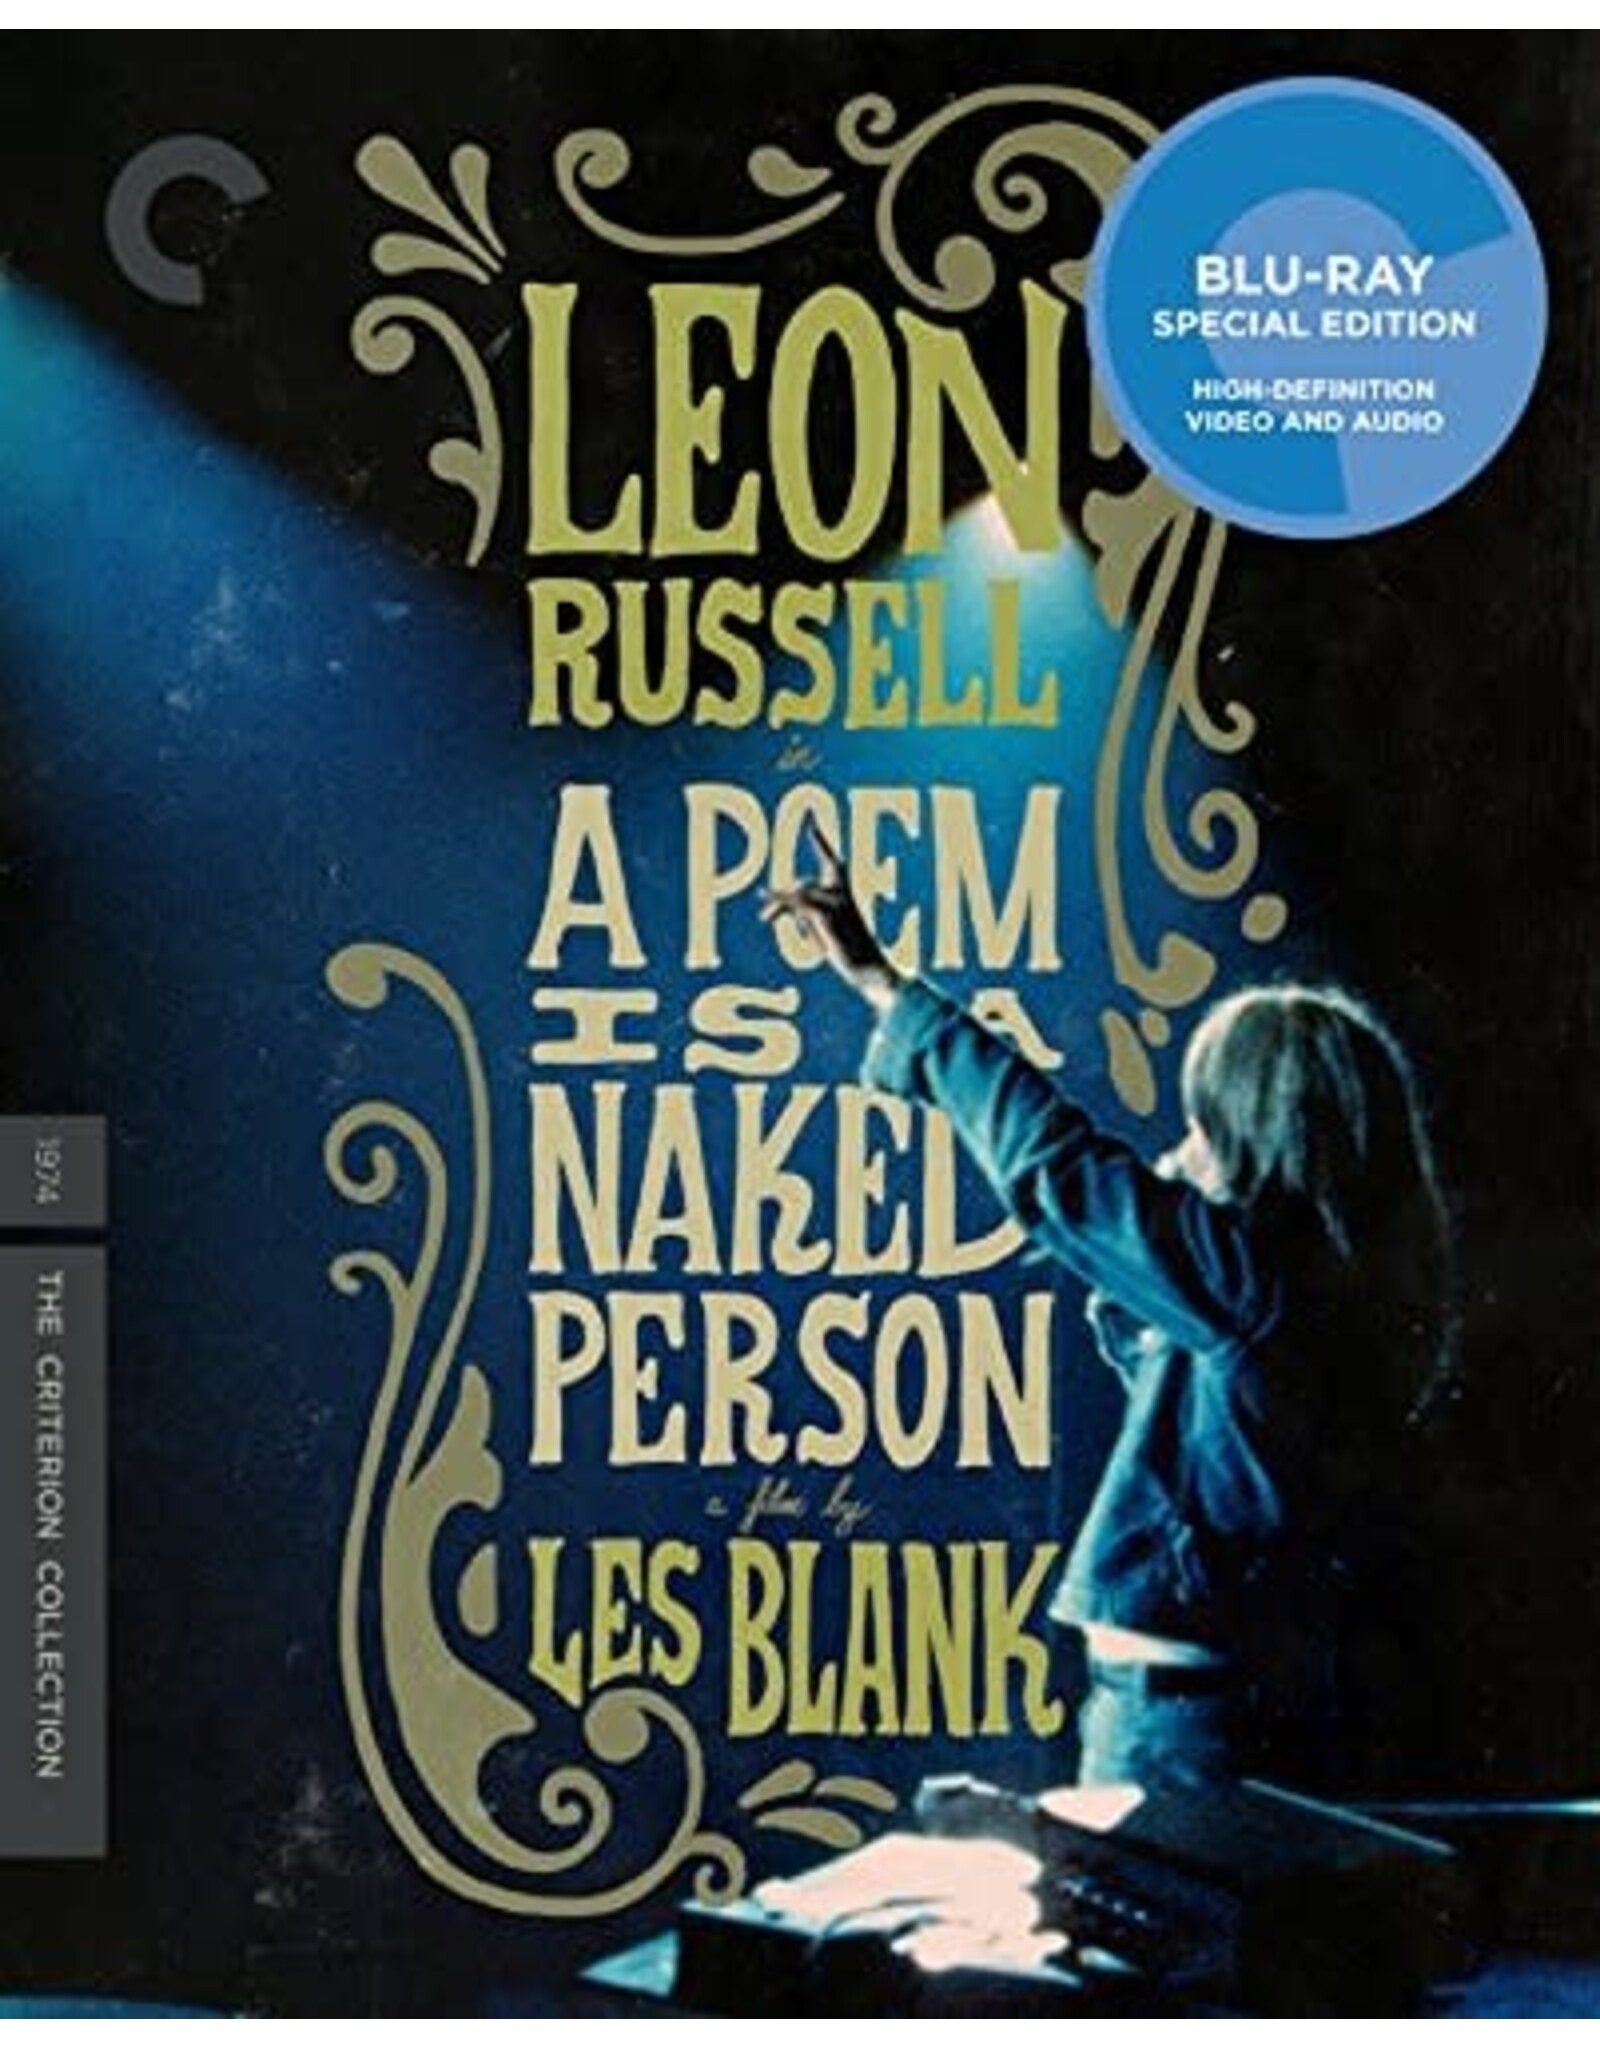 The Criterion Collection, A Year In DVD And Blu-ray Artwork [UPDATED]